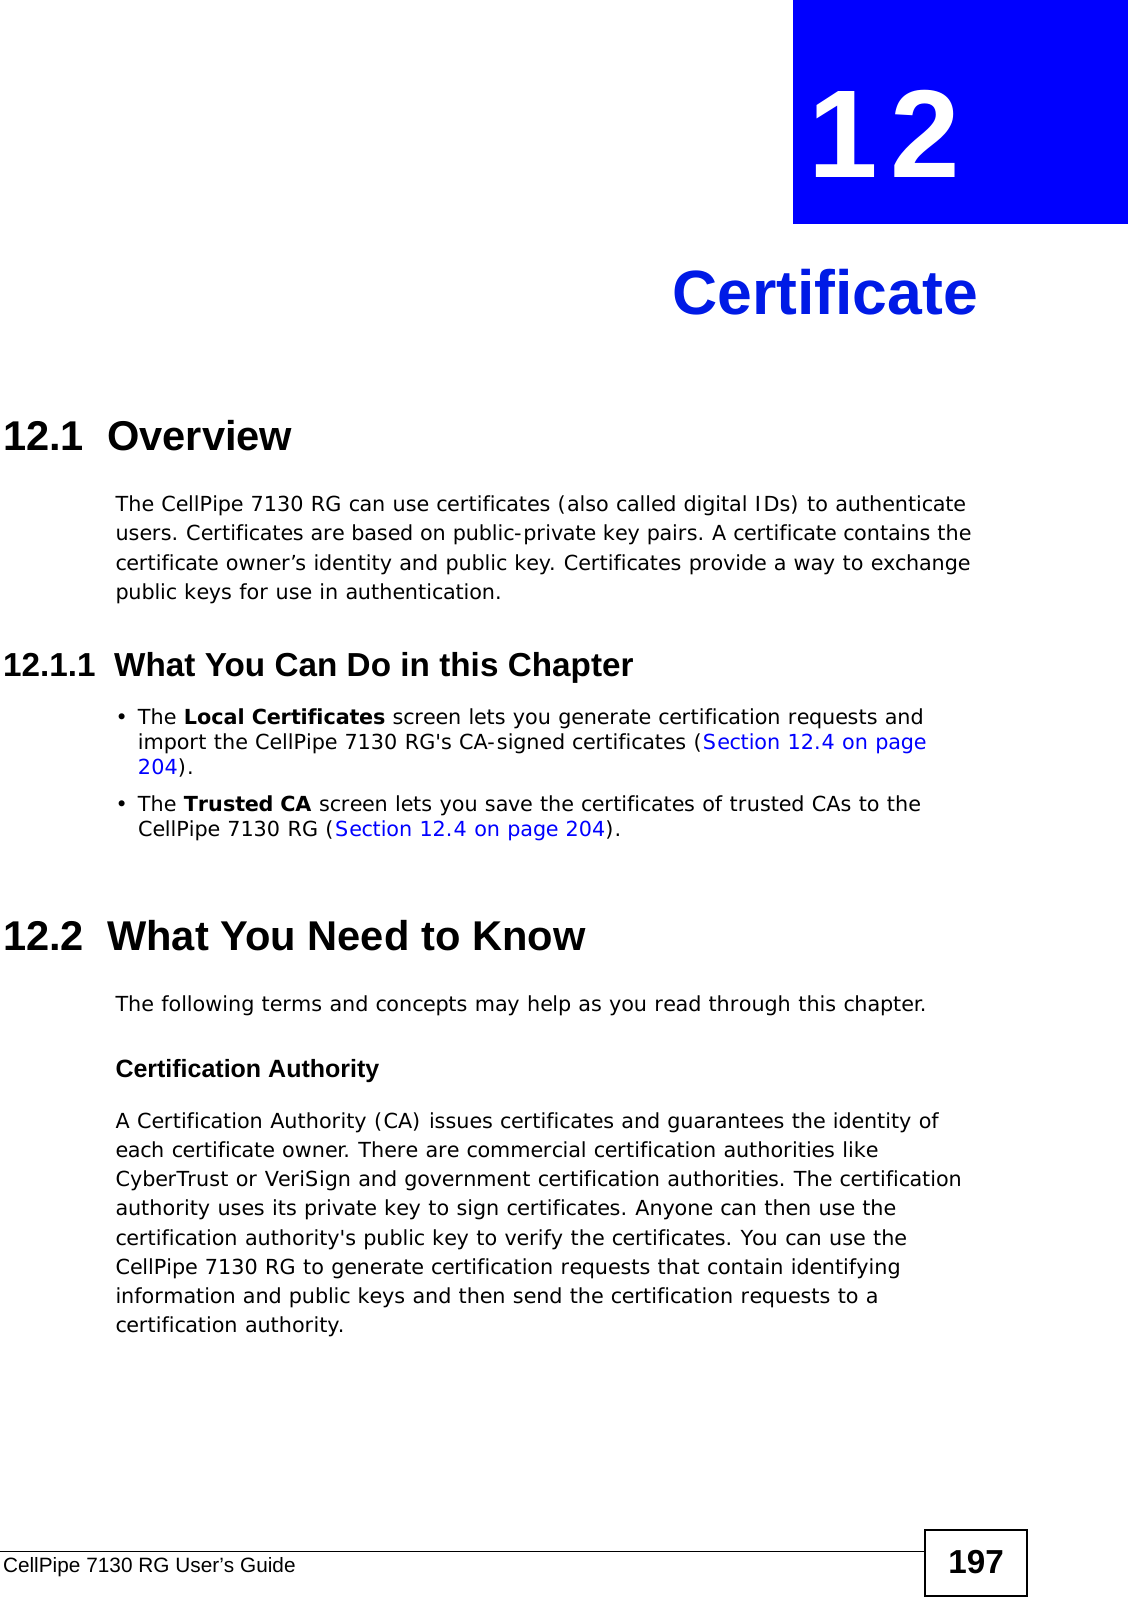 CellPipe 7130 RG User’s Guide 197CHAPTER  12 Certificate12.1  OverviewThe CellPipe 7130 RG can use certificates (also called digital IDs) to authenticate users. Certificates are based on public-private key pairs. A certificate contains the certificate owner’s identity and public key. Certificates provide a way to exchange public keys for use in authentication. 12.1.1  What You Can Do in this Chapter•The Local Certificates screen lets you generate certification requests and import the CellPipe 7130 RG&apos;s CA-signed certificates (Section 12.4 on page 204).•The Trusted CA screen lets you save the certificates of trusted CAs to the CellPipe 7130 RG (Section 12.4 on page 204).12.2  What You Need to KnowThe following terms and concepts may help as you read through this chapter.Certification Authority A Certification Authority (CA) issues certificates and guarantees the identity of each certificate owner. There are commercial certification authorities like CyberTrust or VeriSign and government certification authorities. The certification authority uses its private key to sign certificates. Anyone can then use the certification authority&apos;s public key to verify the certificates. You can use the CellPipe 7130 RG to generate certification requests that contain identifying information and public keys and then send the certification requests to a certification authority.